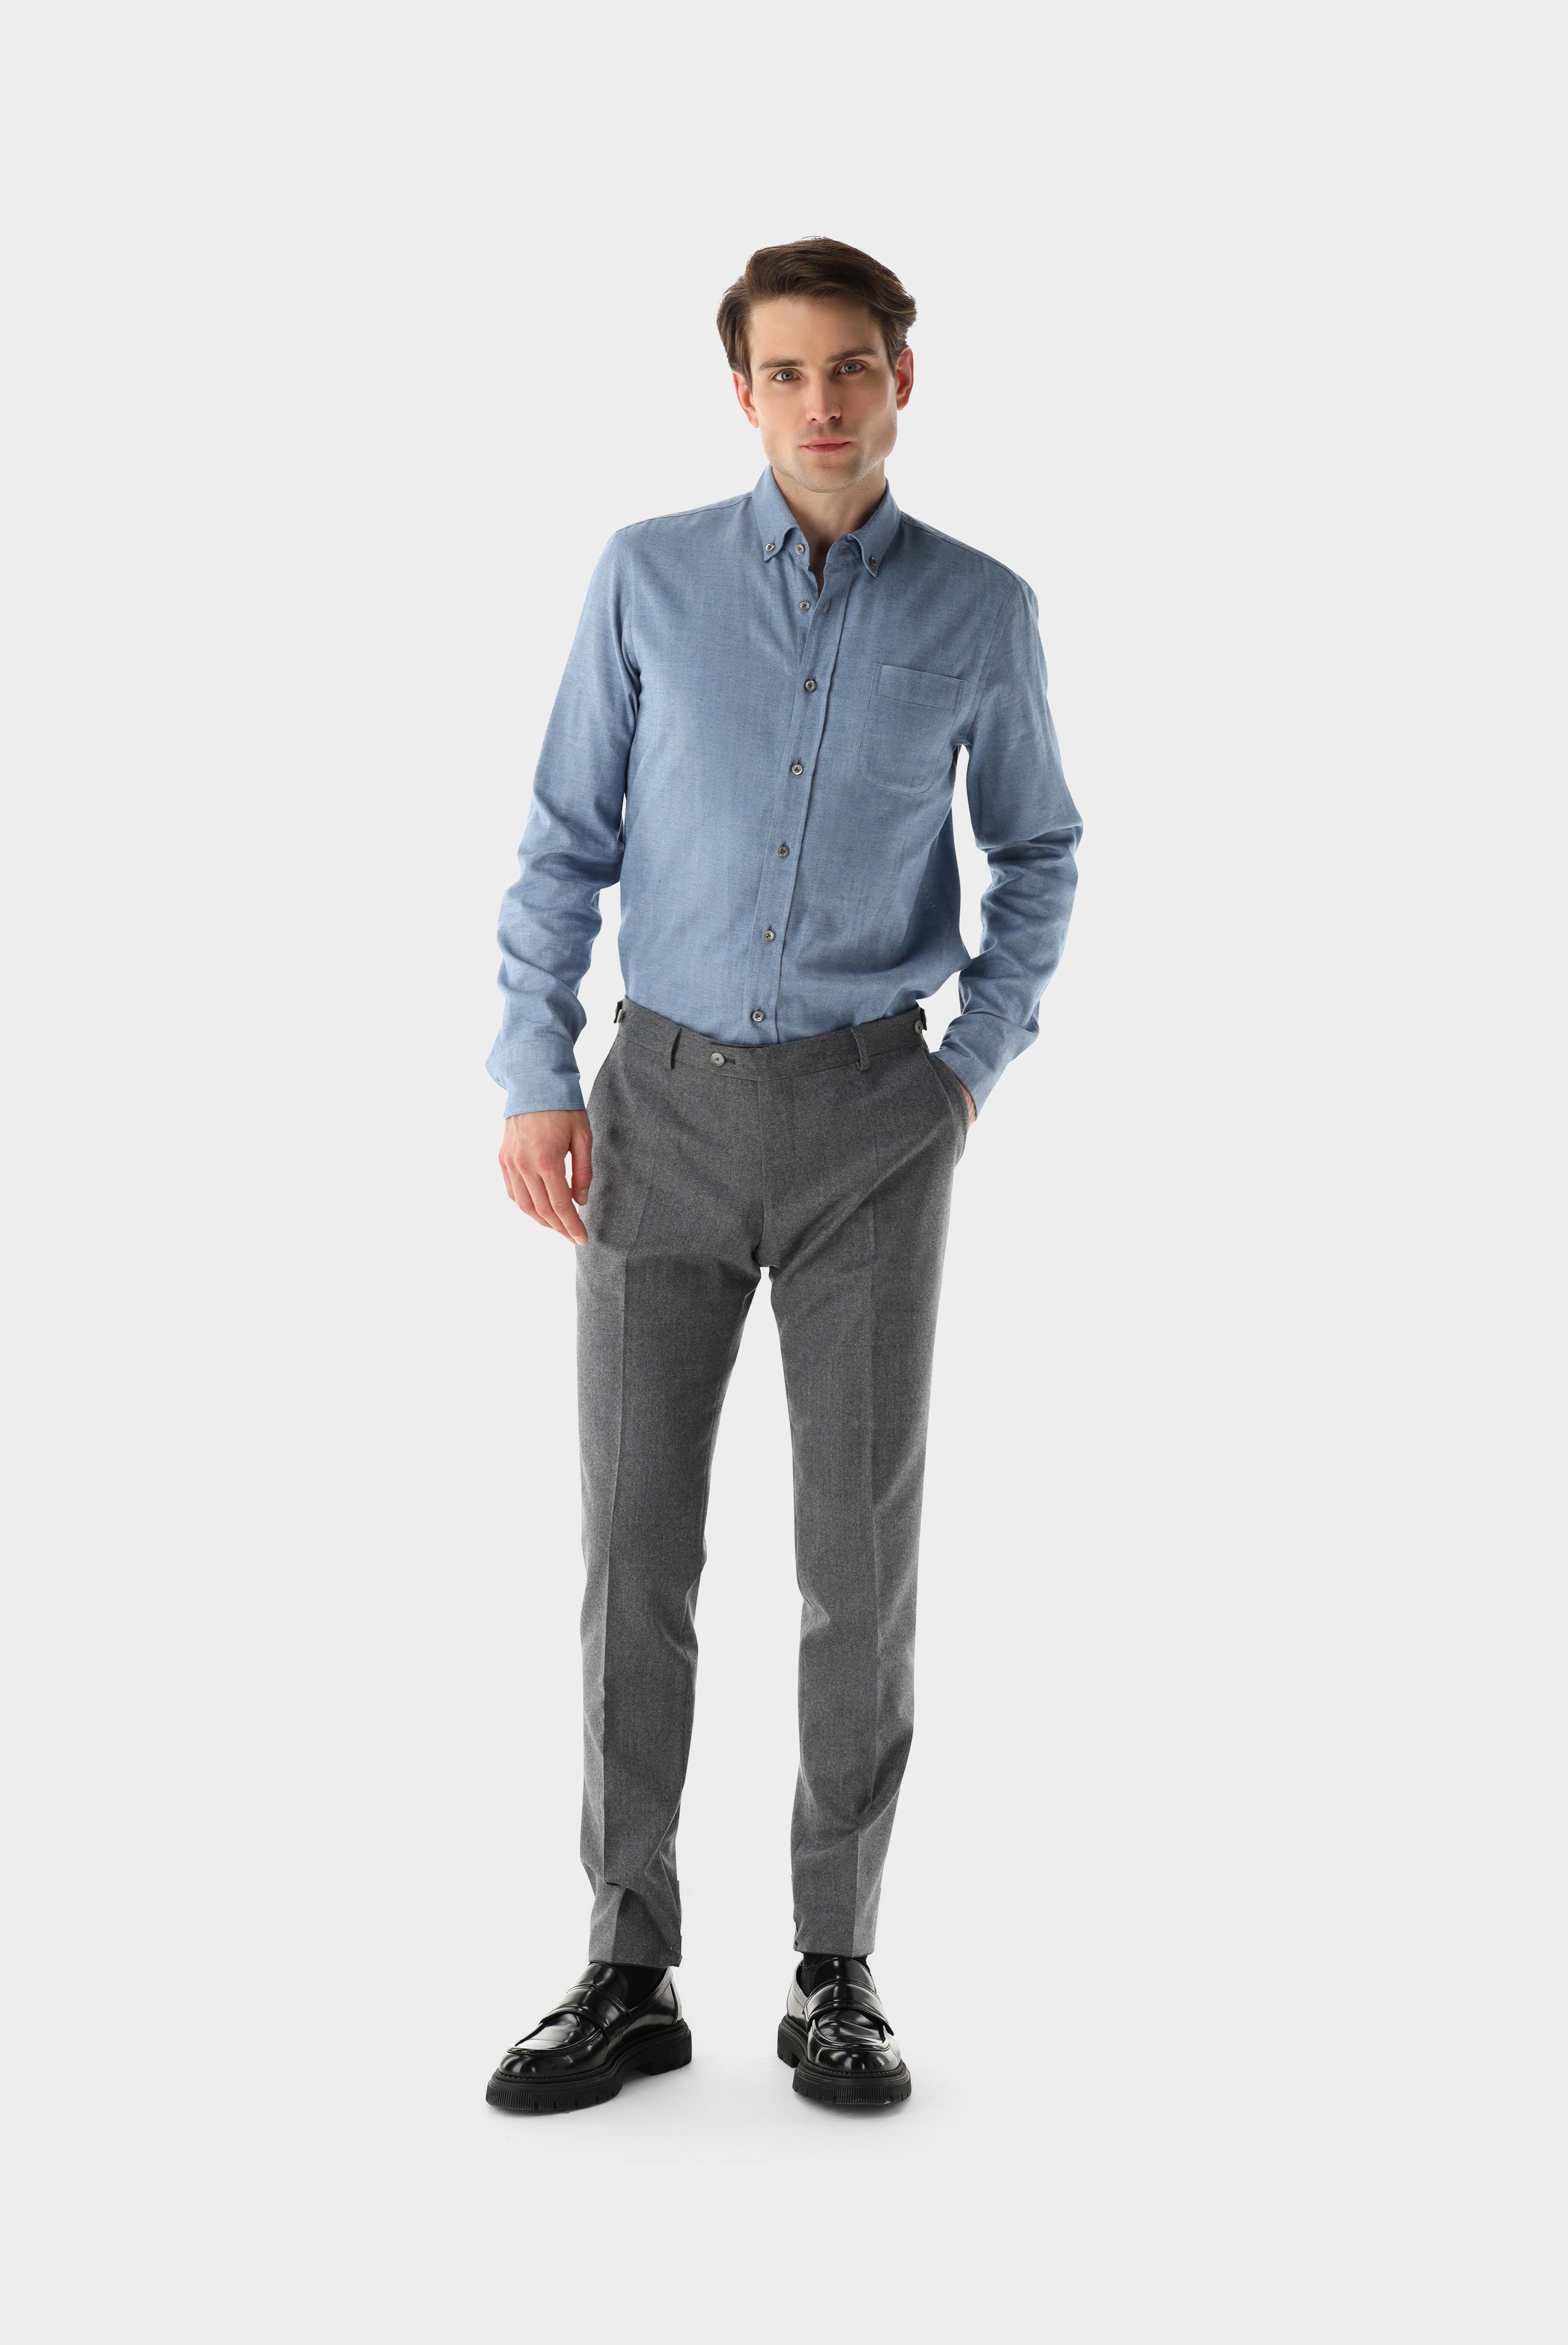 Casual Hemden+Button-Down Flanellhemd Tailor Fit+20.2013.9V.155045.770.39